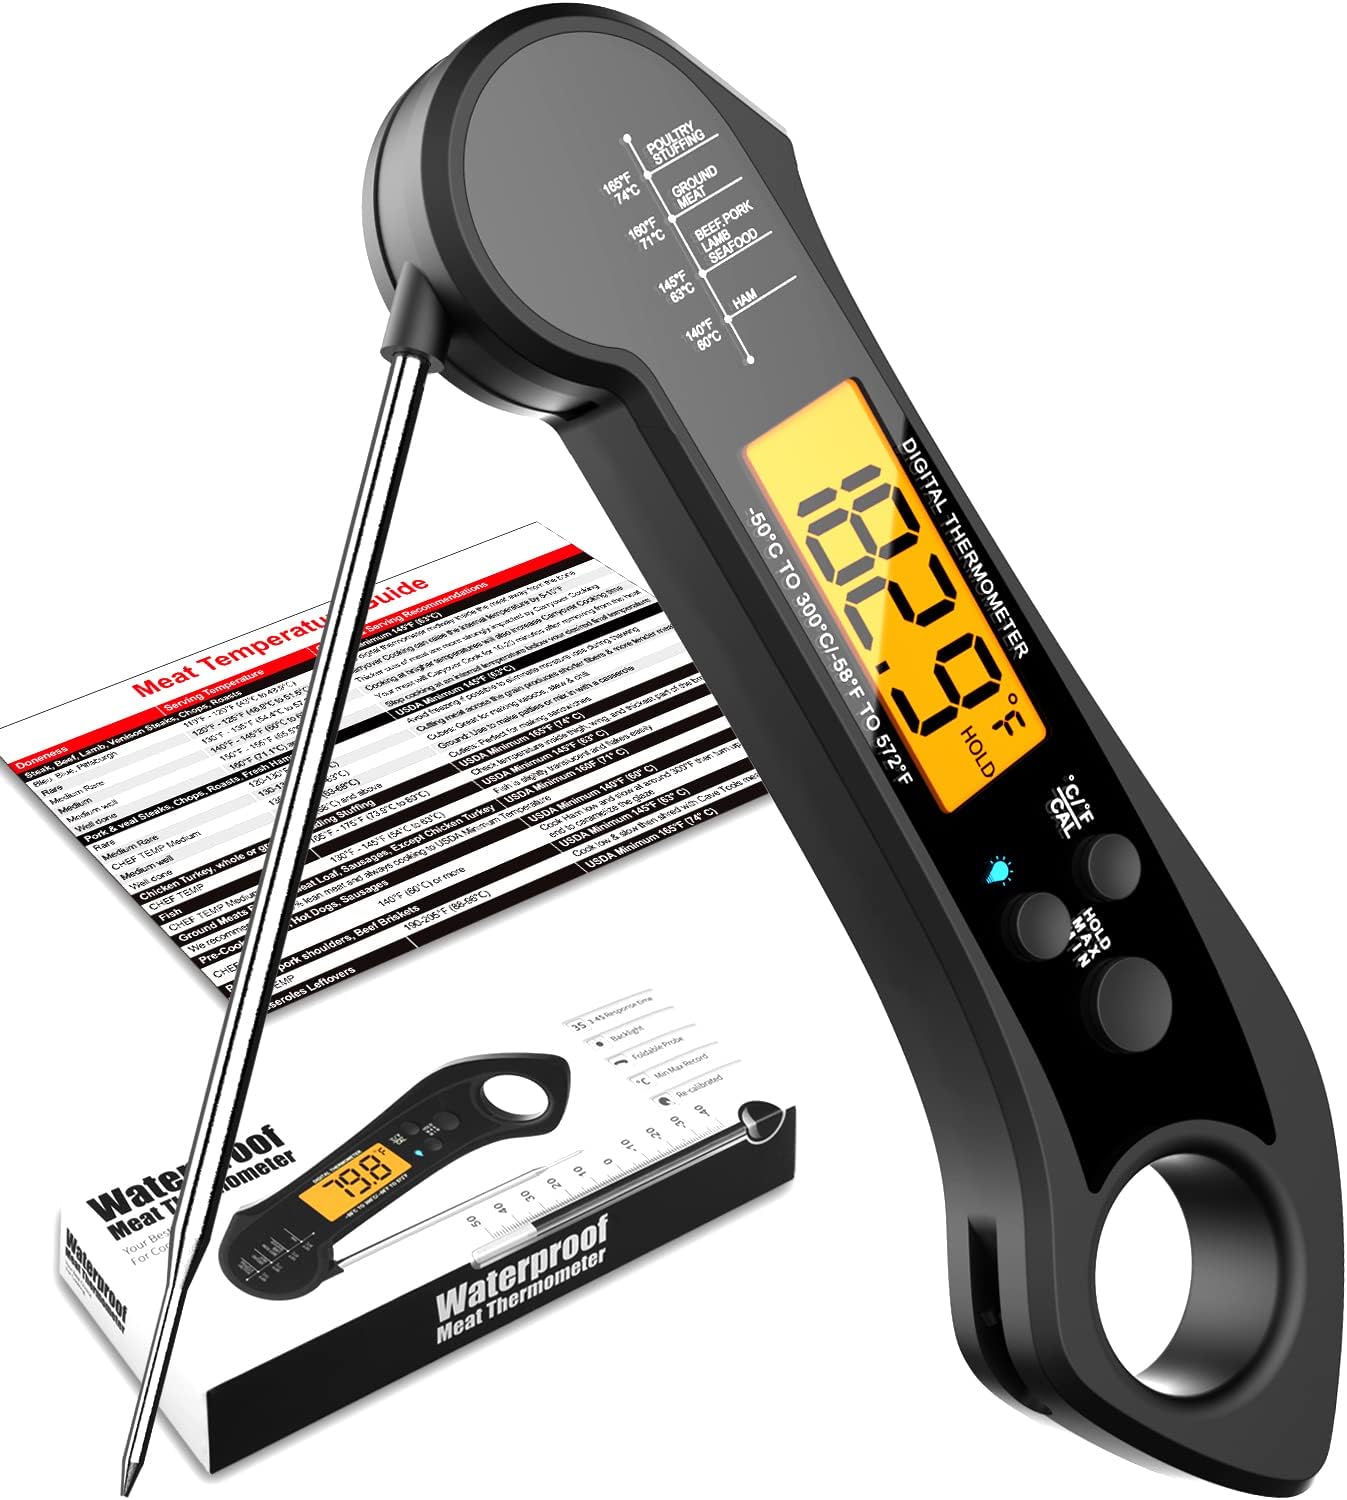 Digital Meat Thermometer for Cooking, Biison Wireless [...]